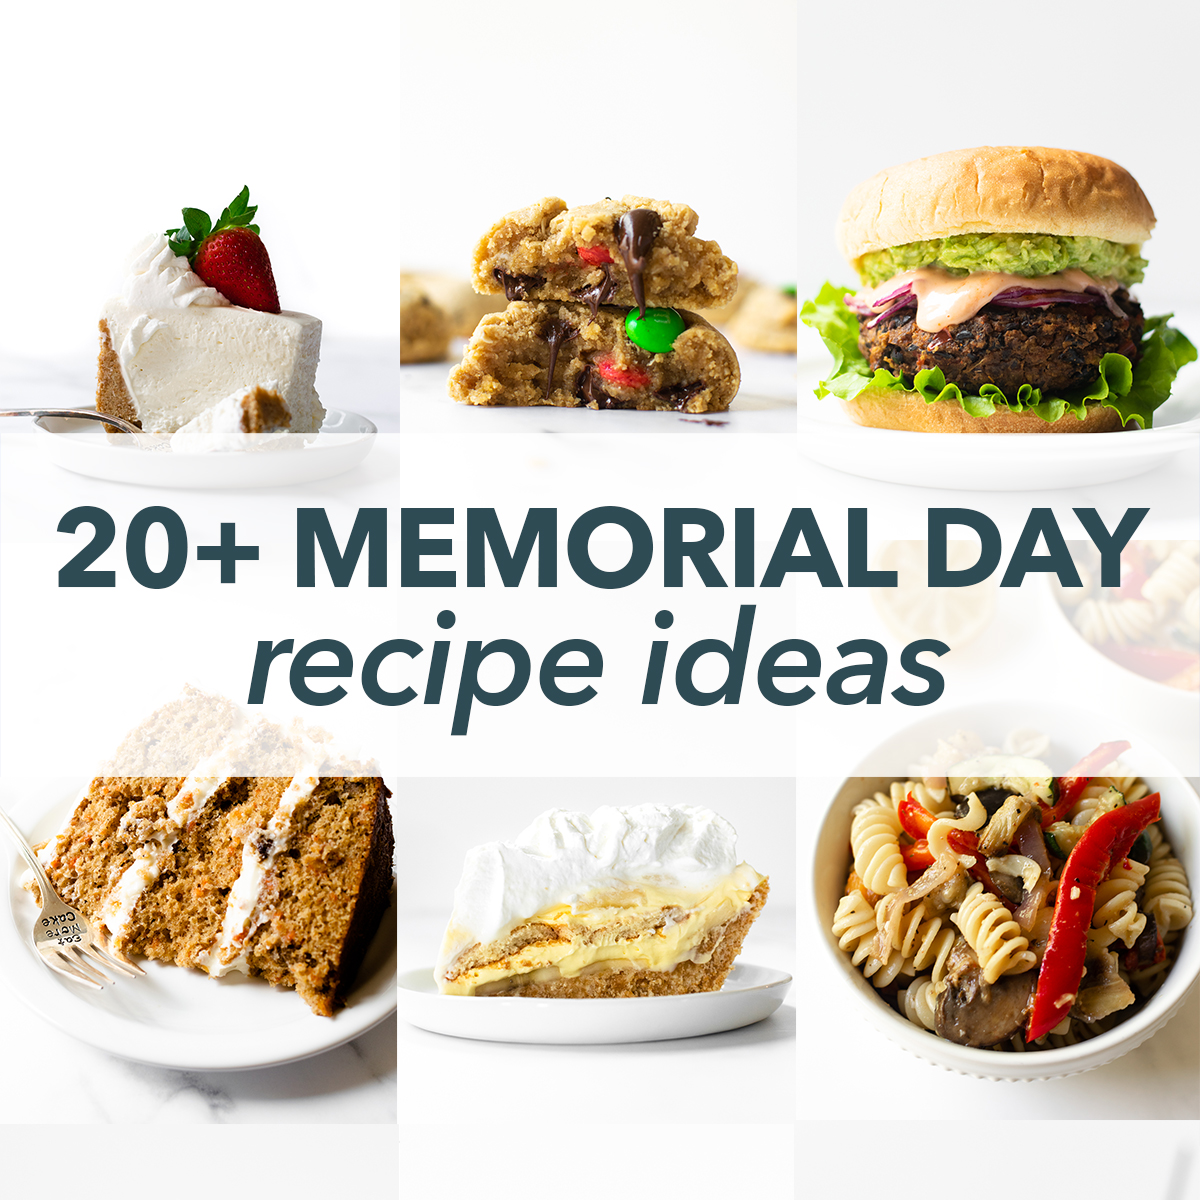 From turkey burgers to black bean burgers to banana pudding pie to classic chocolate chip cookies, find inspiration with this collection of Memorial Day recipes.